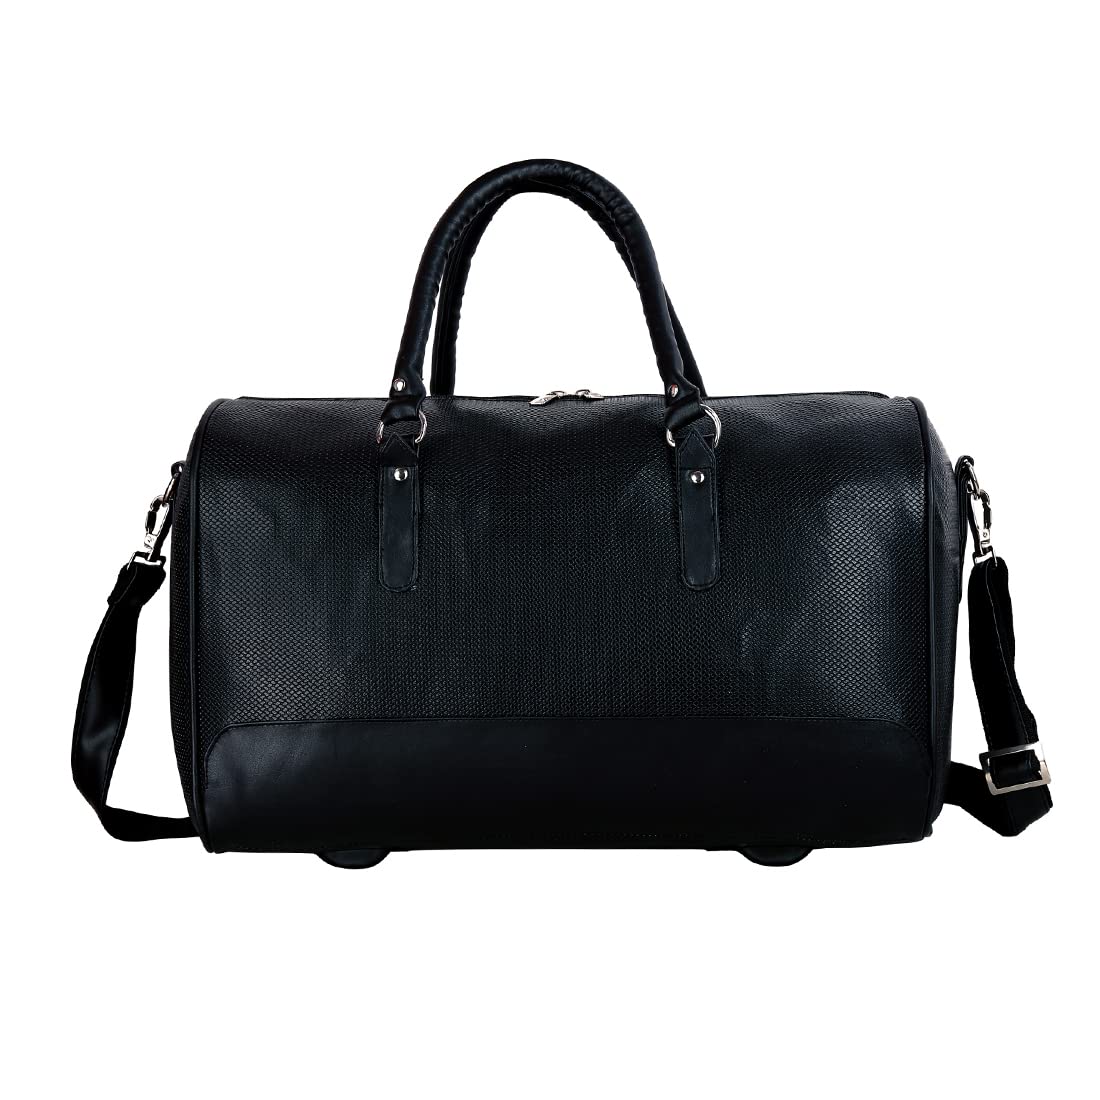 Leather World Vegan Leather Black Textured 18 Inch Travel Duffle Luggage Bag for Men Women